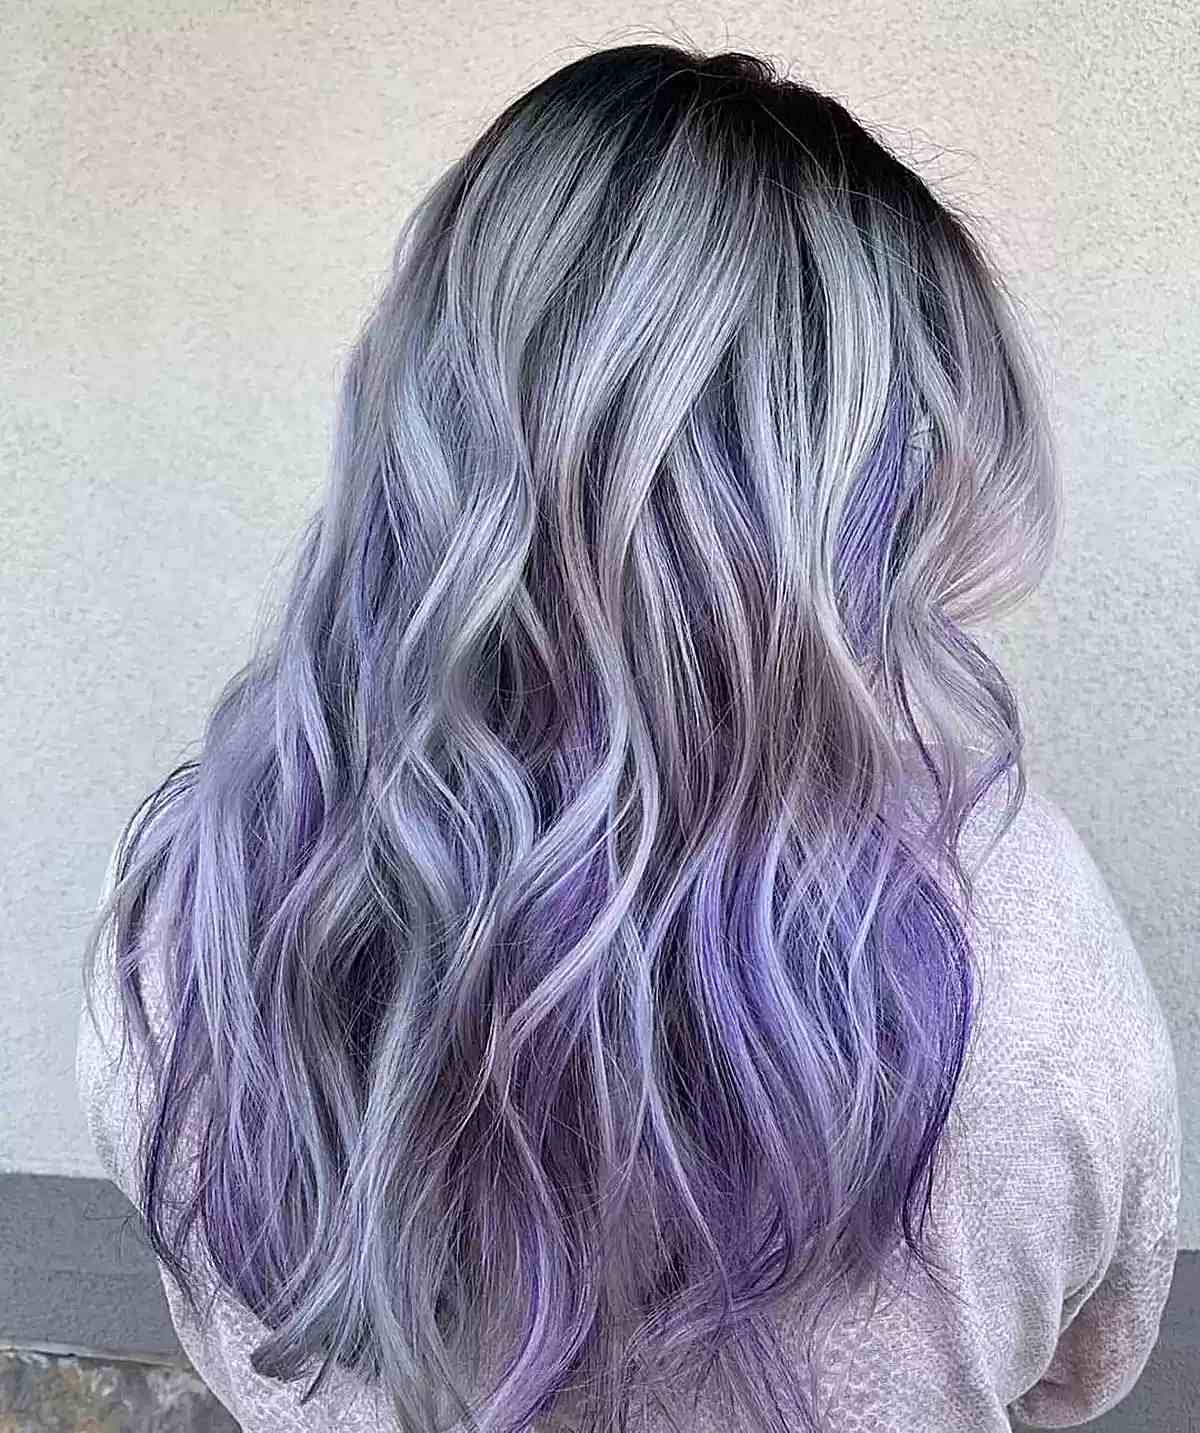 Purple and Silver Balayage Highlights with Black Roots for Long Waves